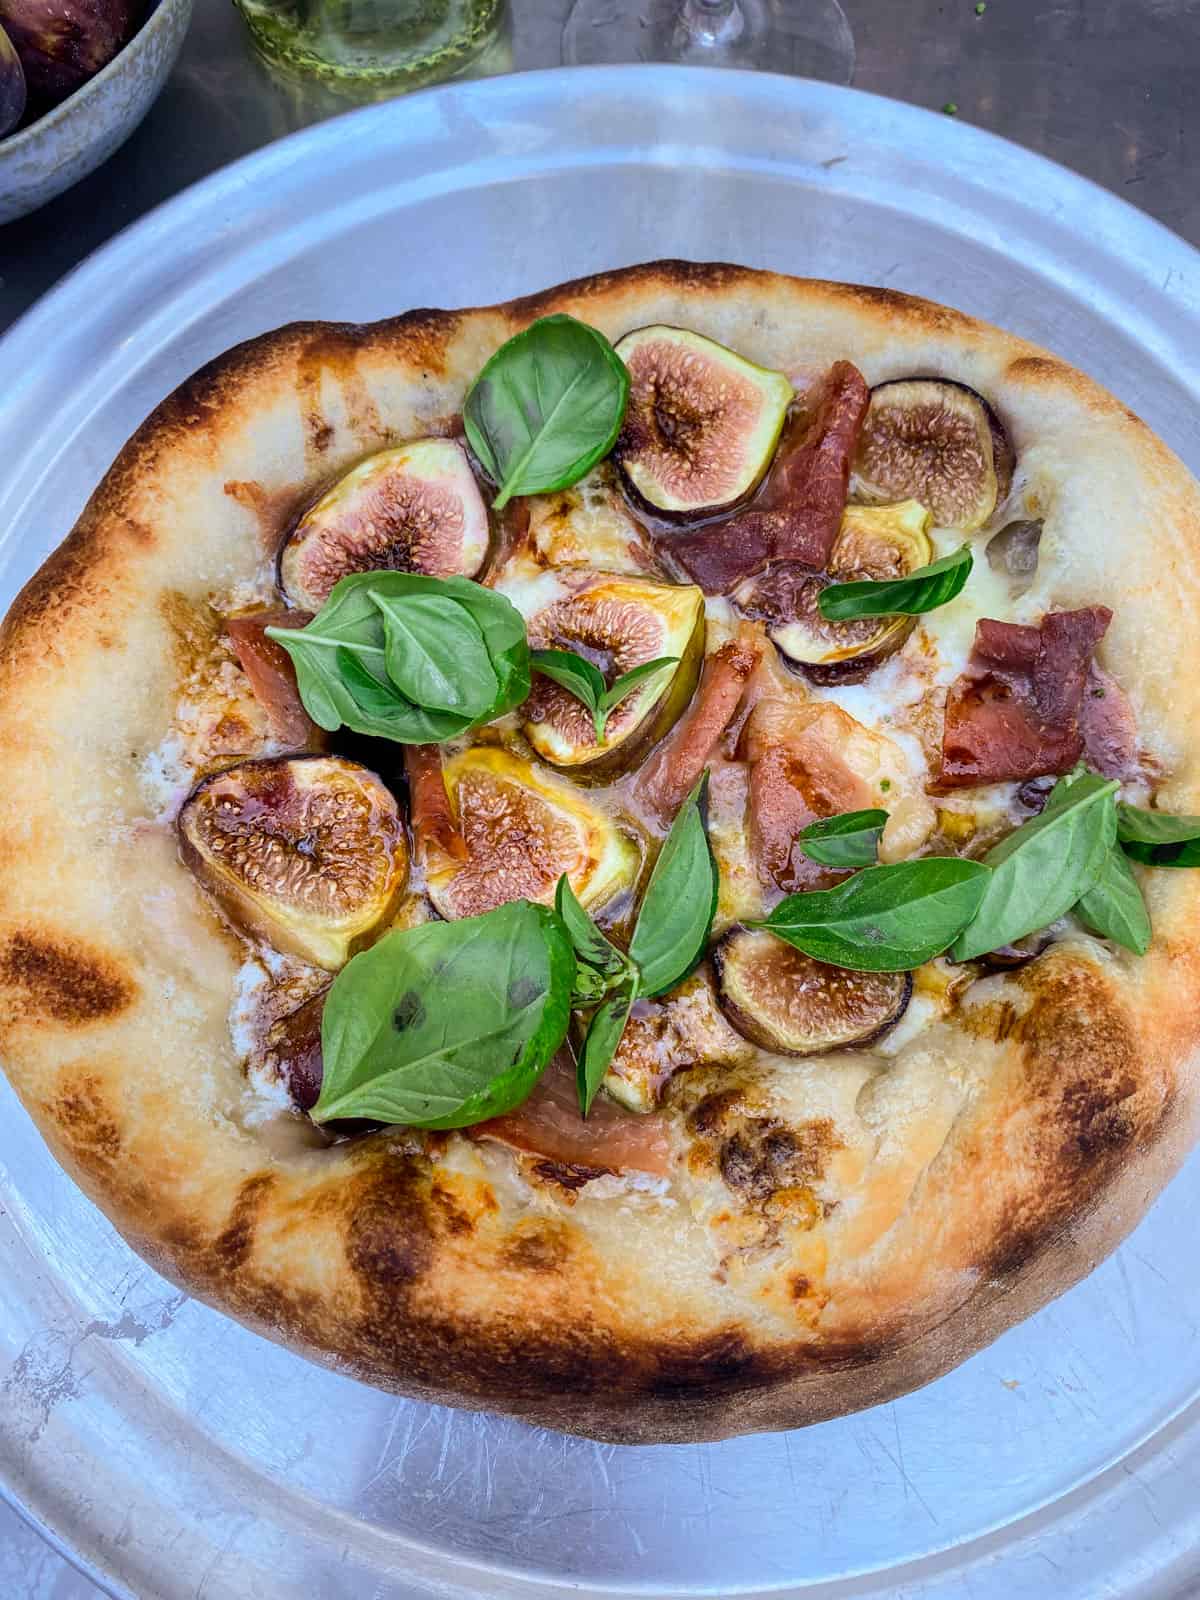 Once the prosciutto and fig pizza is golden brown and cooked through, garnish with drizzle of balsamic and fresh basil leaves,